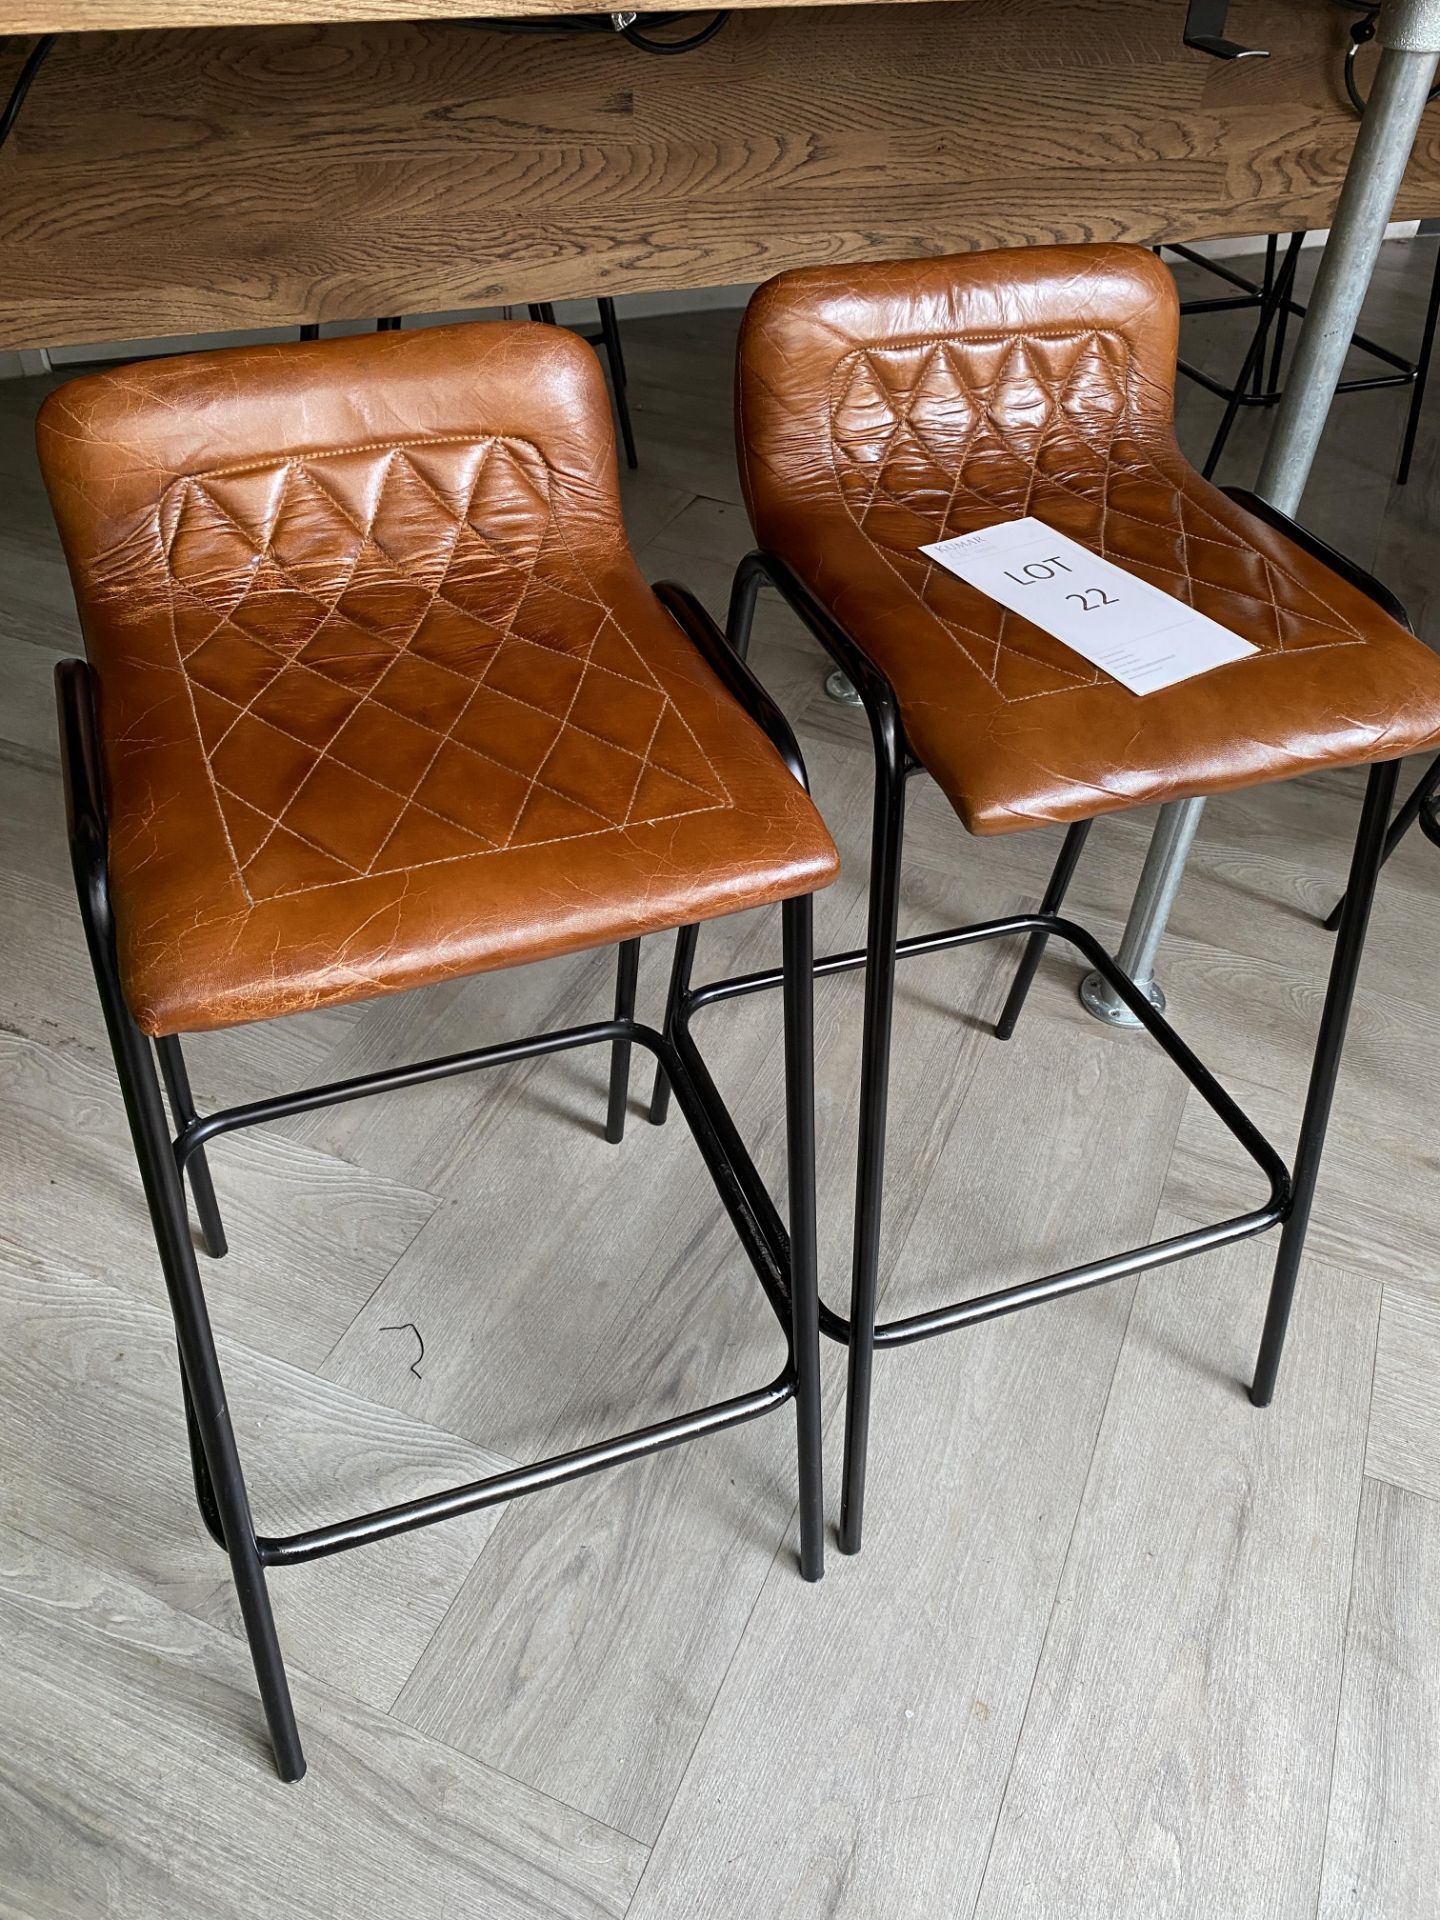 2x Leather Upholstered Bar Stools - New Cost £120 per stool - Image 2 of 2